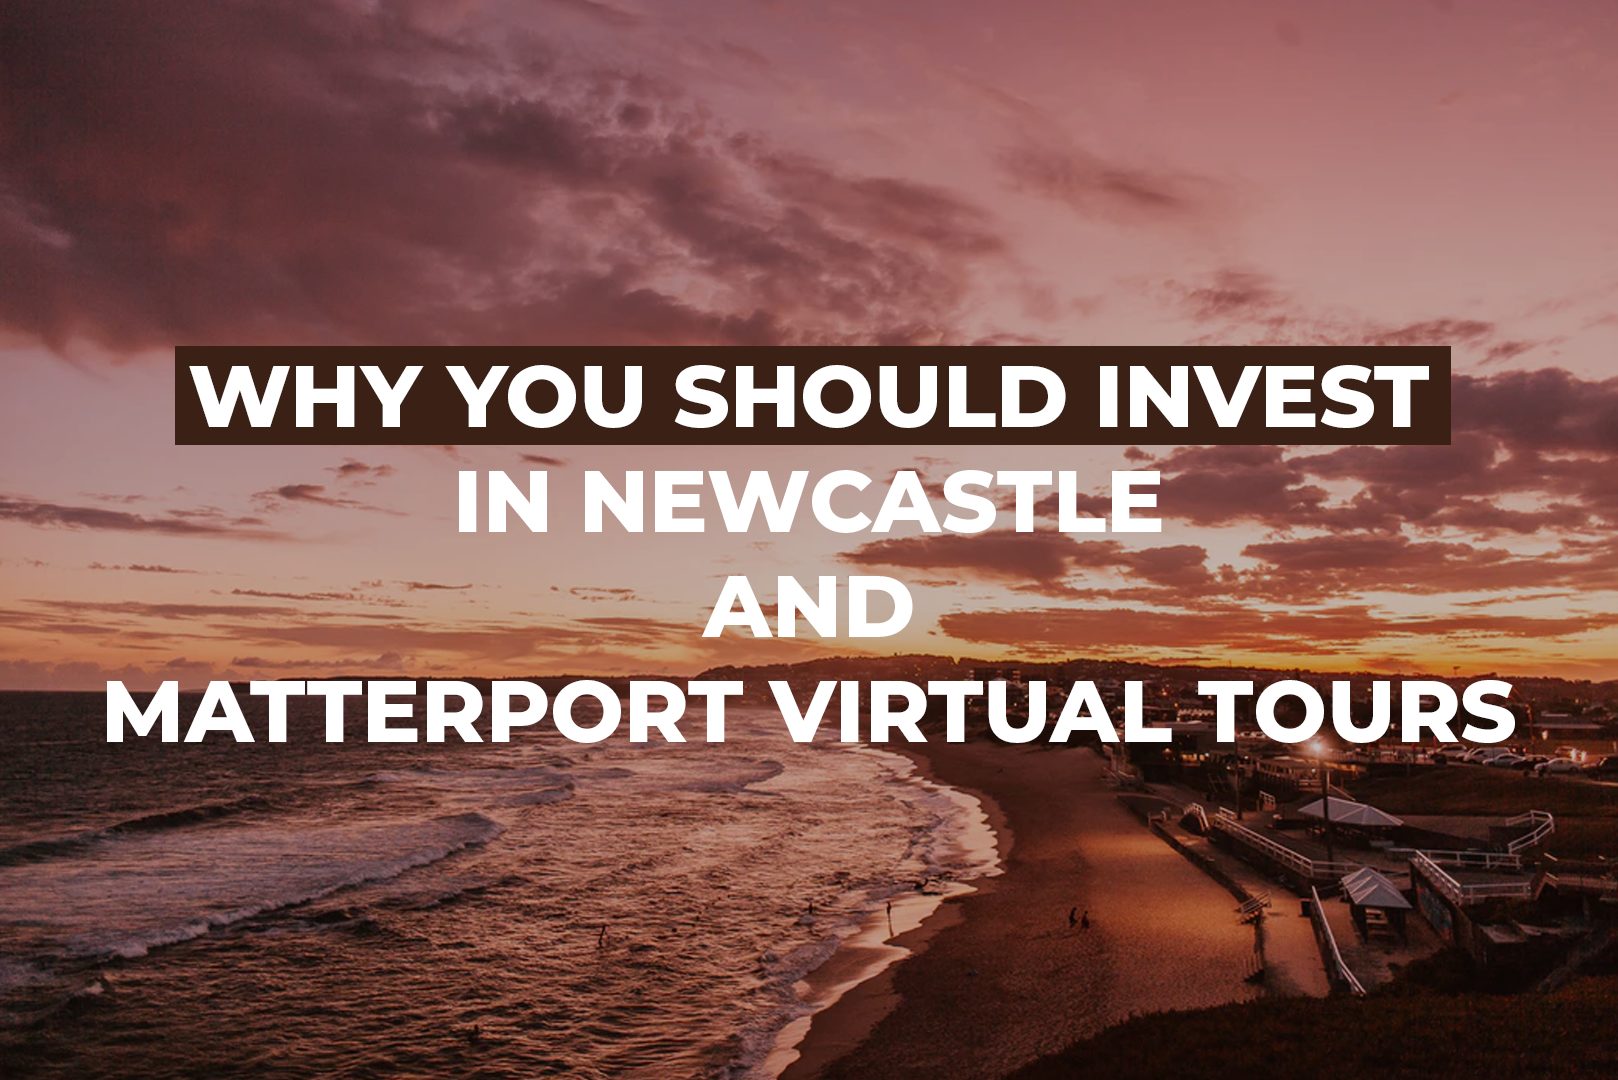 Why You Should Invest In Newcastle And Matterport Virtual Tours